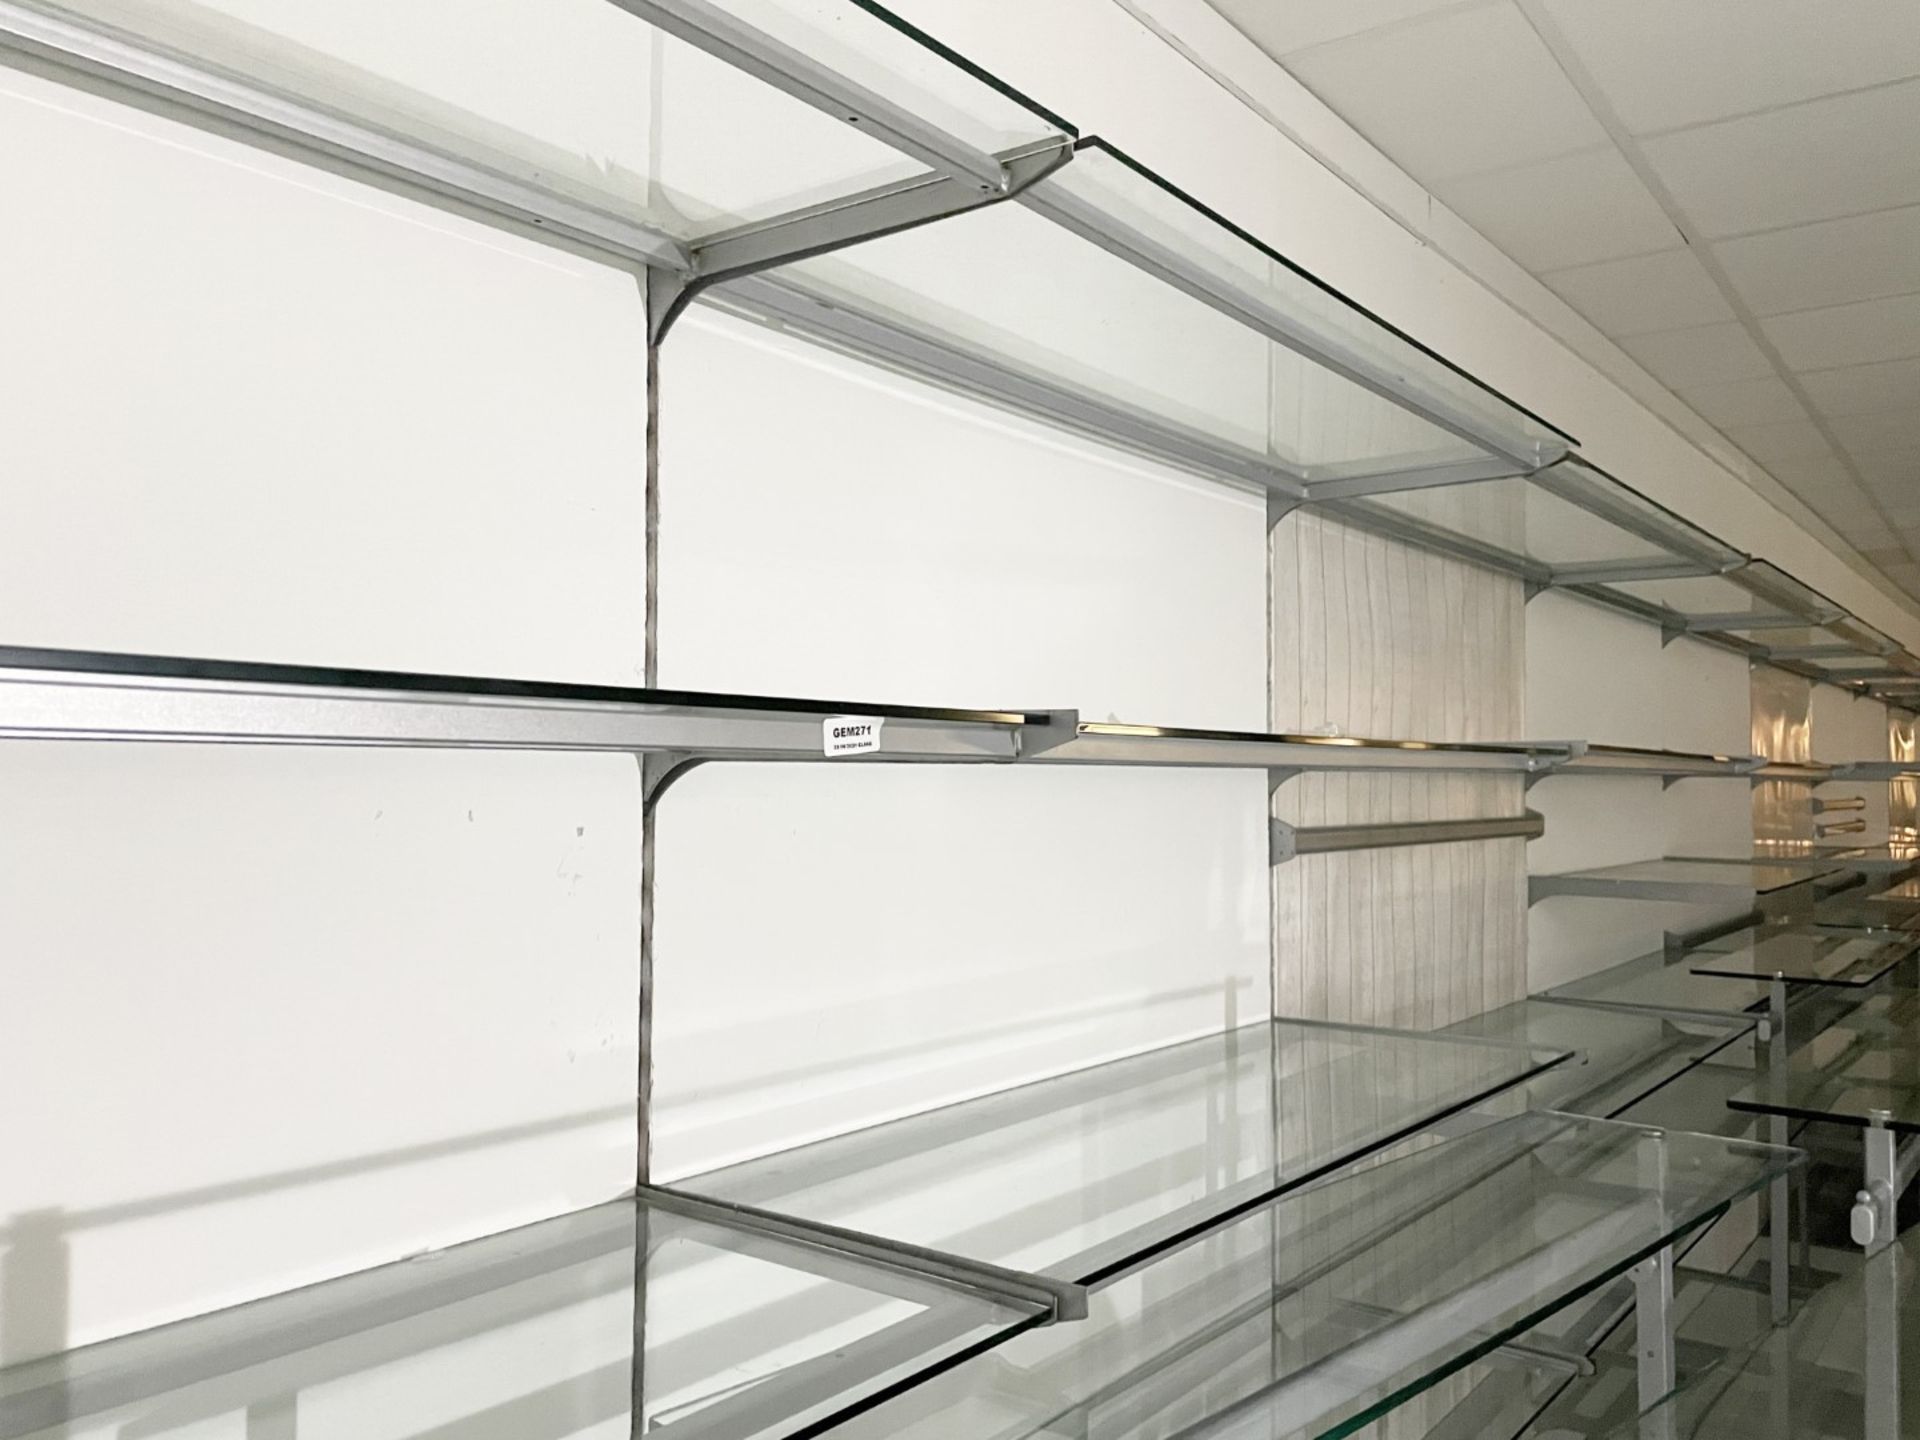 Approx 100 x Glass Wall Display Shelves With Slat Wall Mounting Brackets - CL670 - Ref: GEM271 - - Image 2 of 8